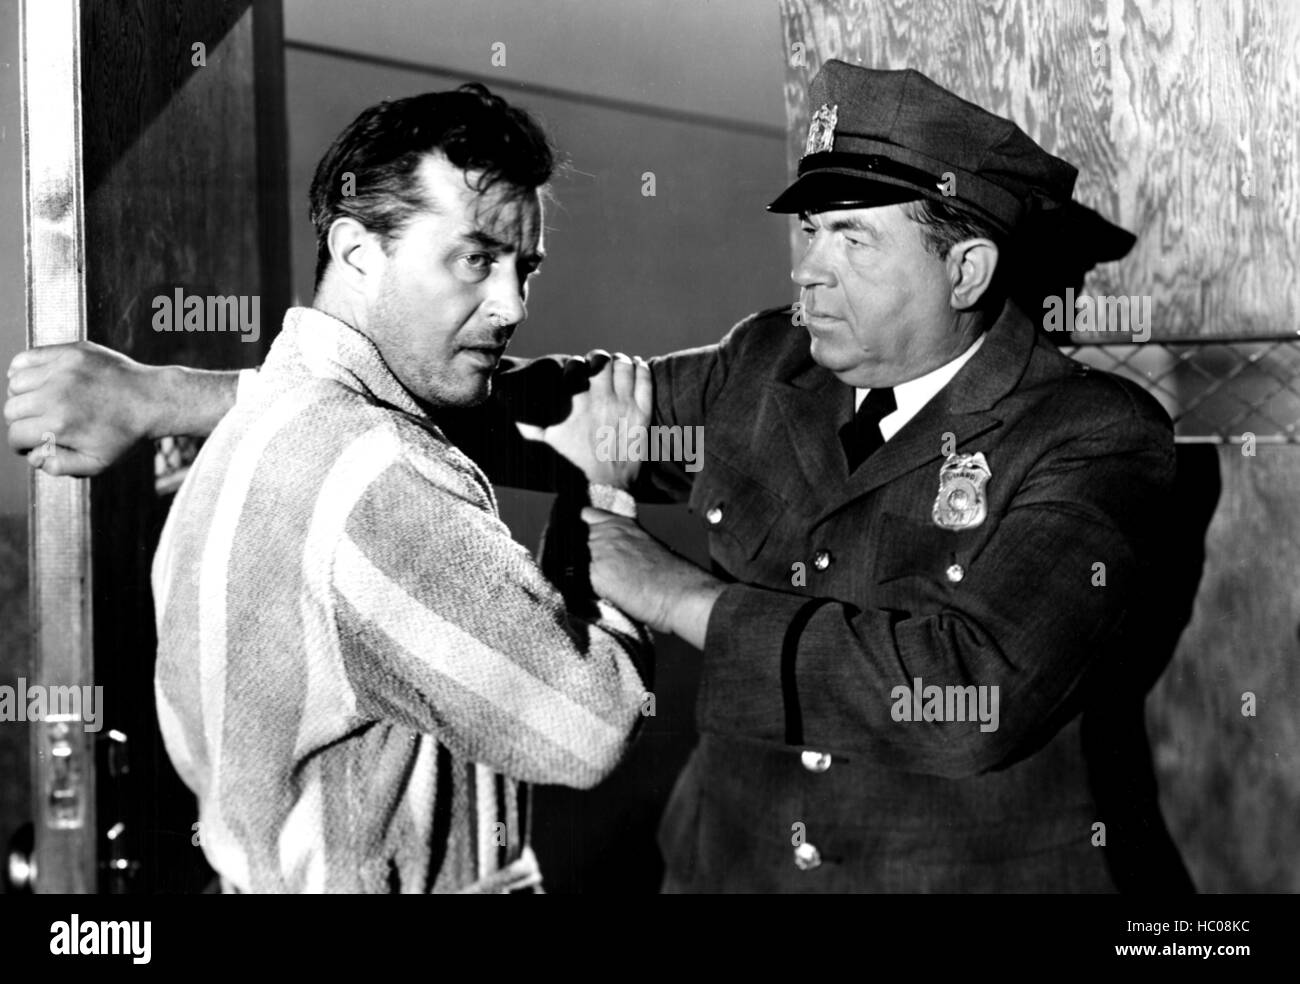 THE LOST WEEKEND, Ray Milland, Lee Shumway, 1945 Stock Photo - Alamy